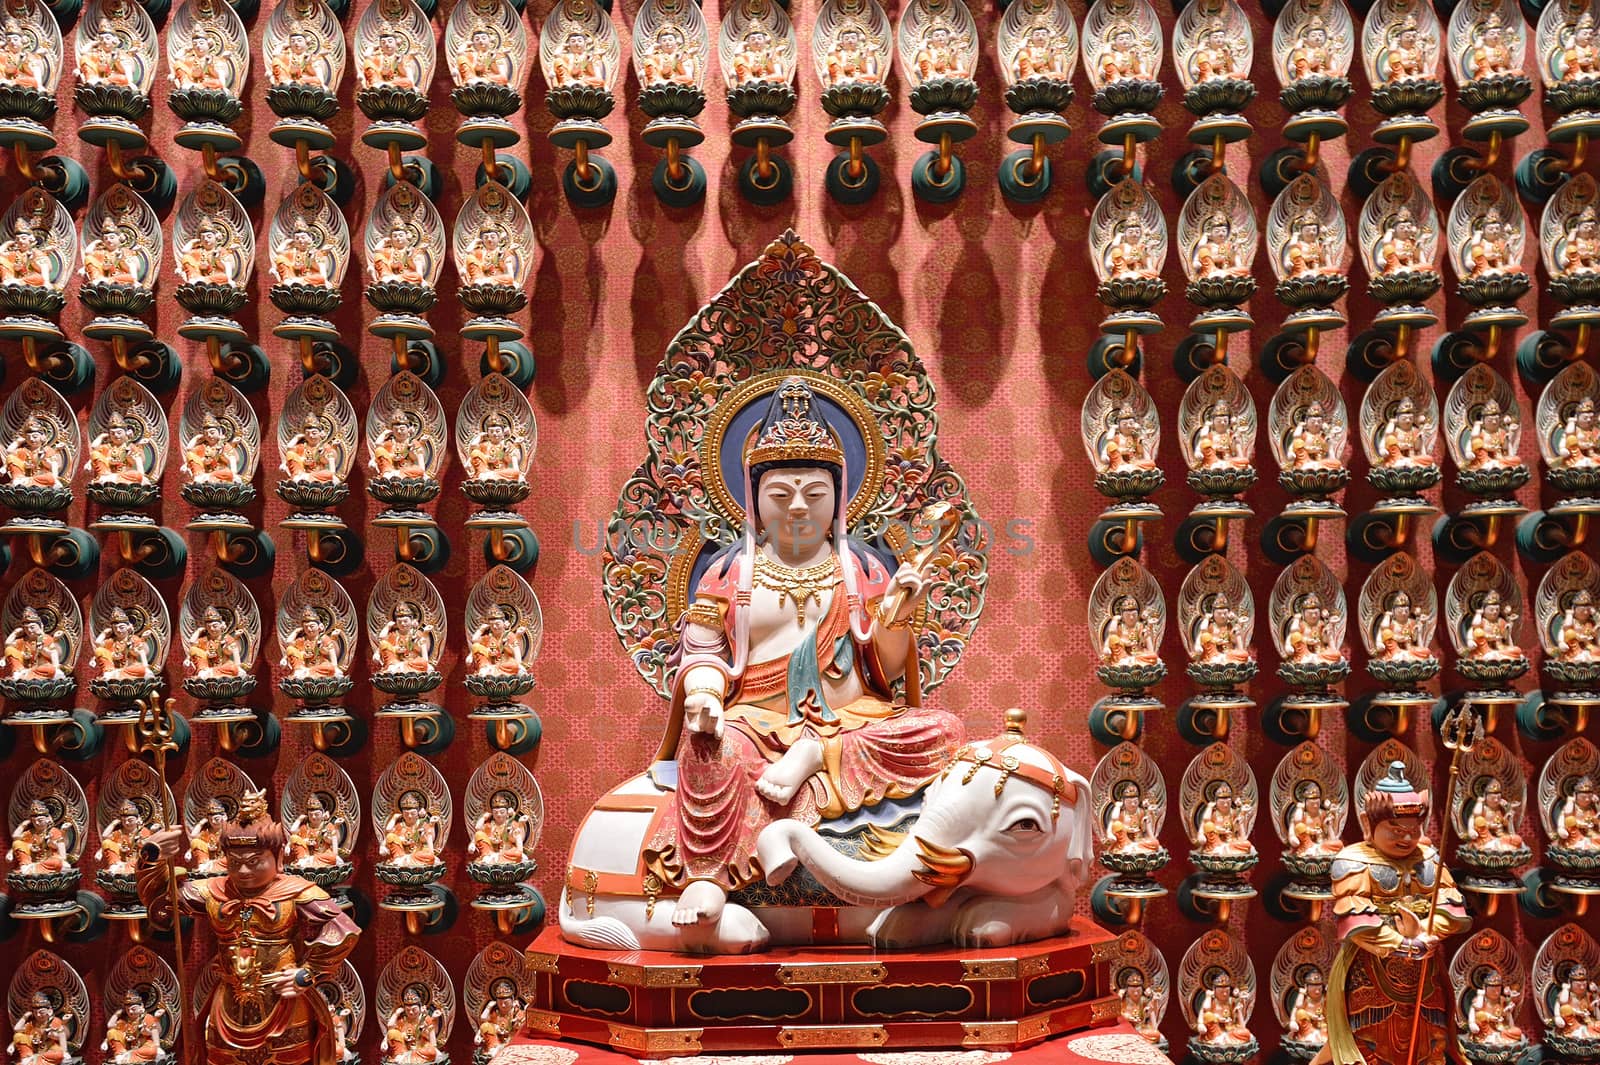 The statue of Buddha in Chinese Buddha Tooth Relic Temple in Sin by think4photop